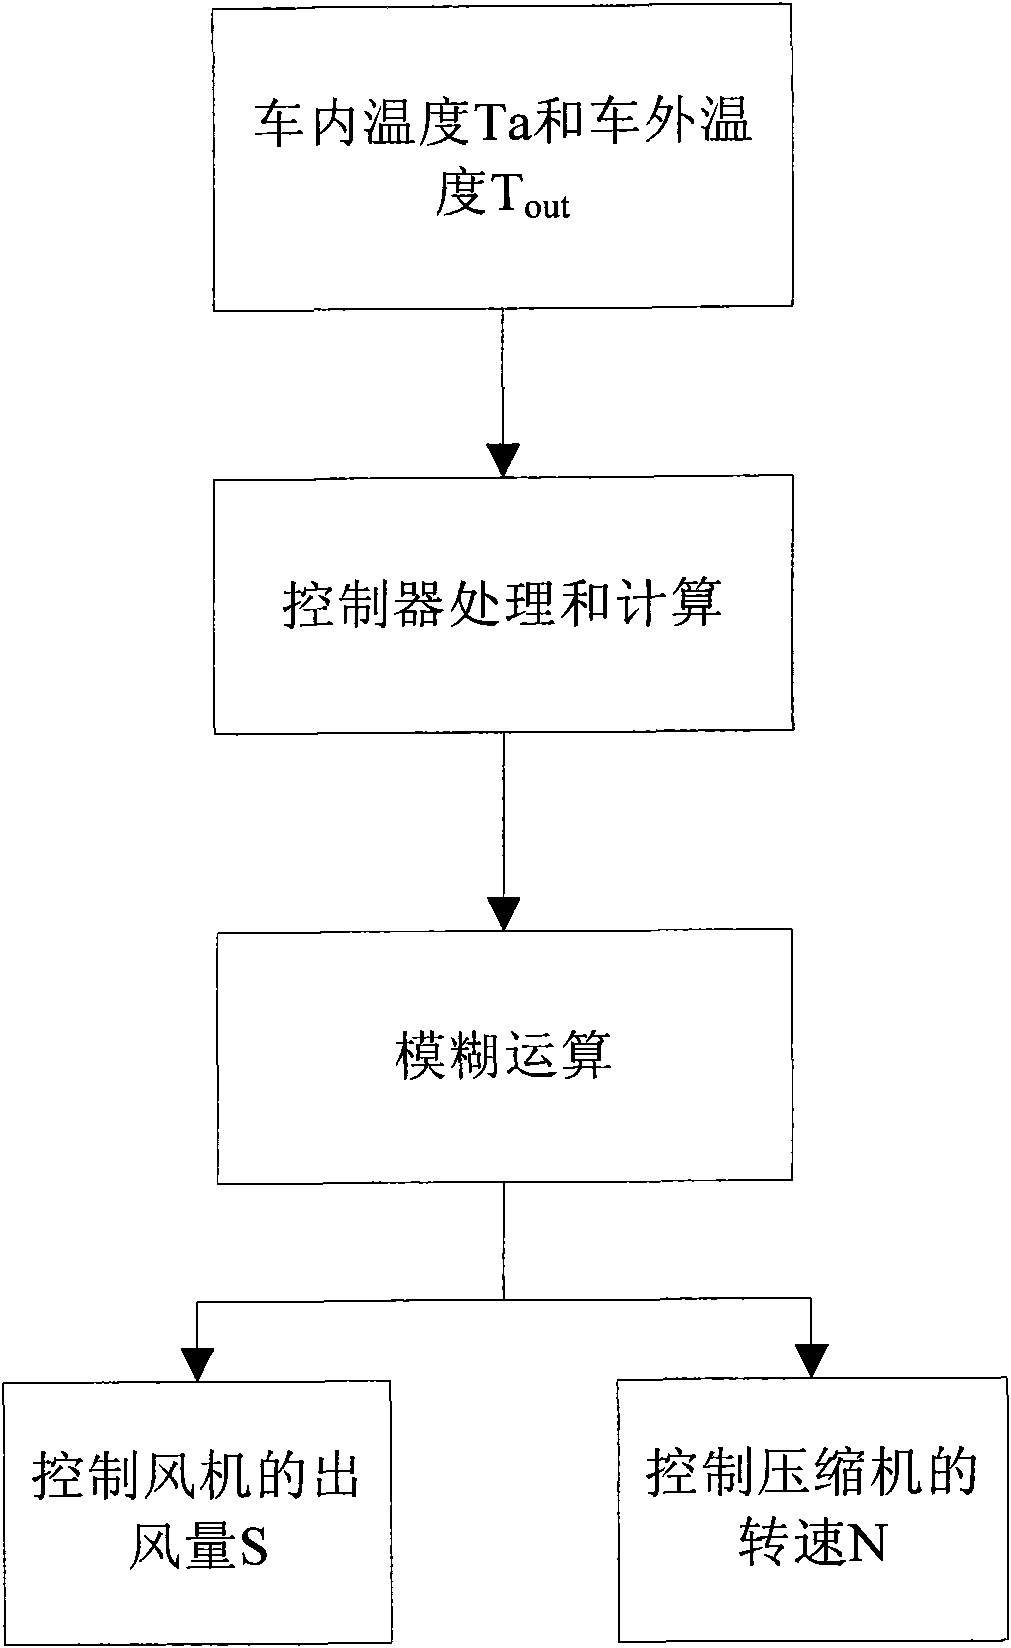 Control method for air conditioning refrigerating system of automobile